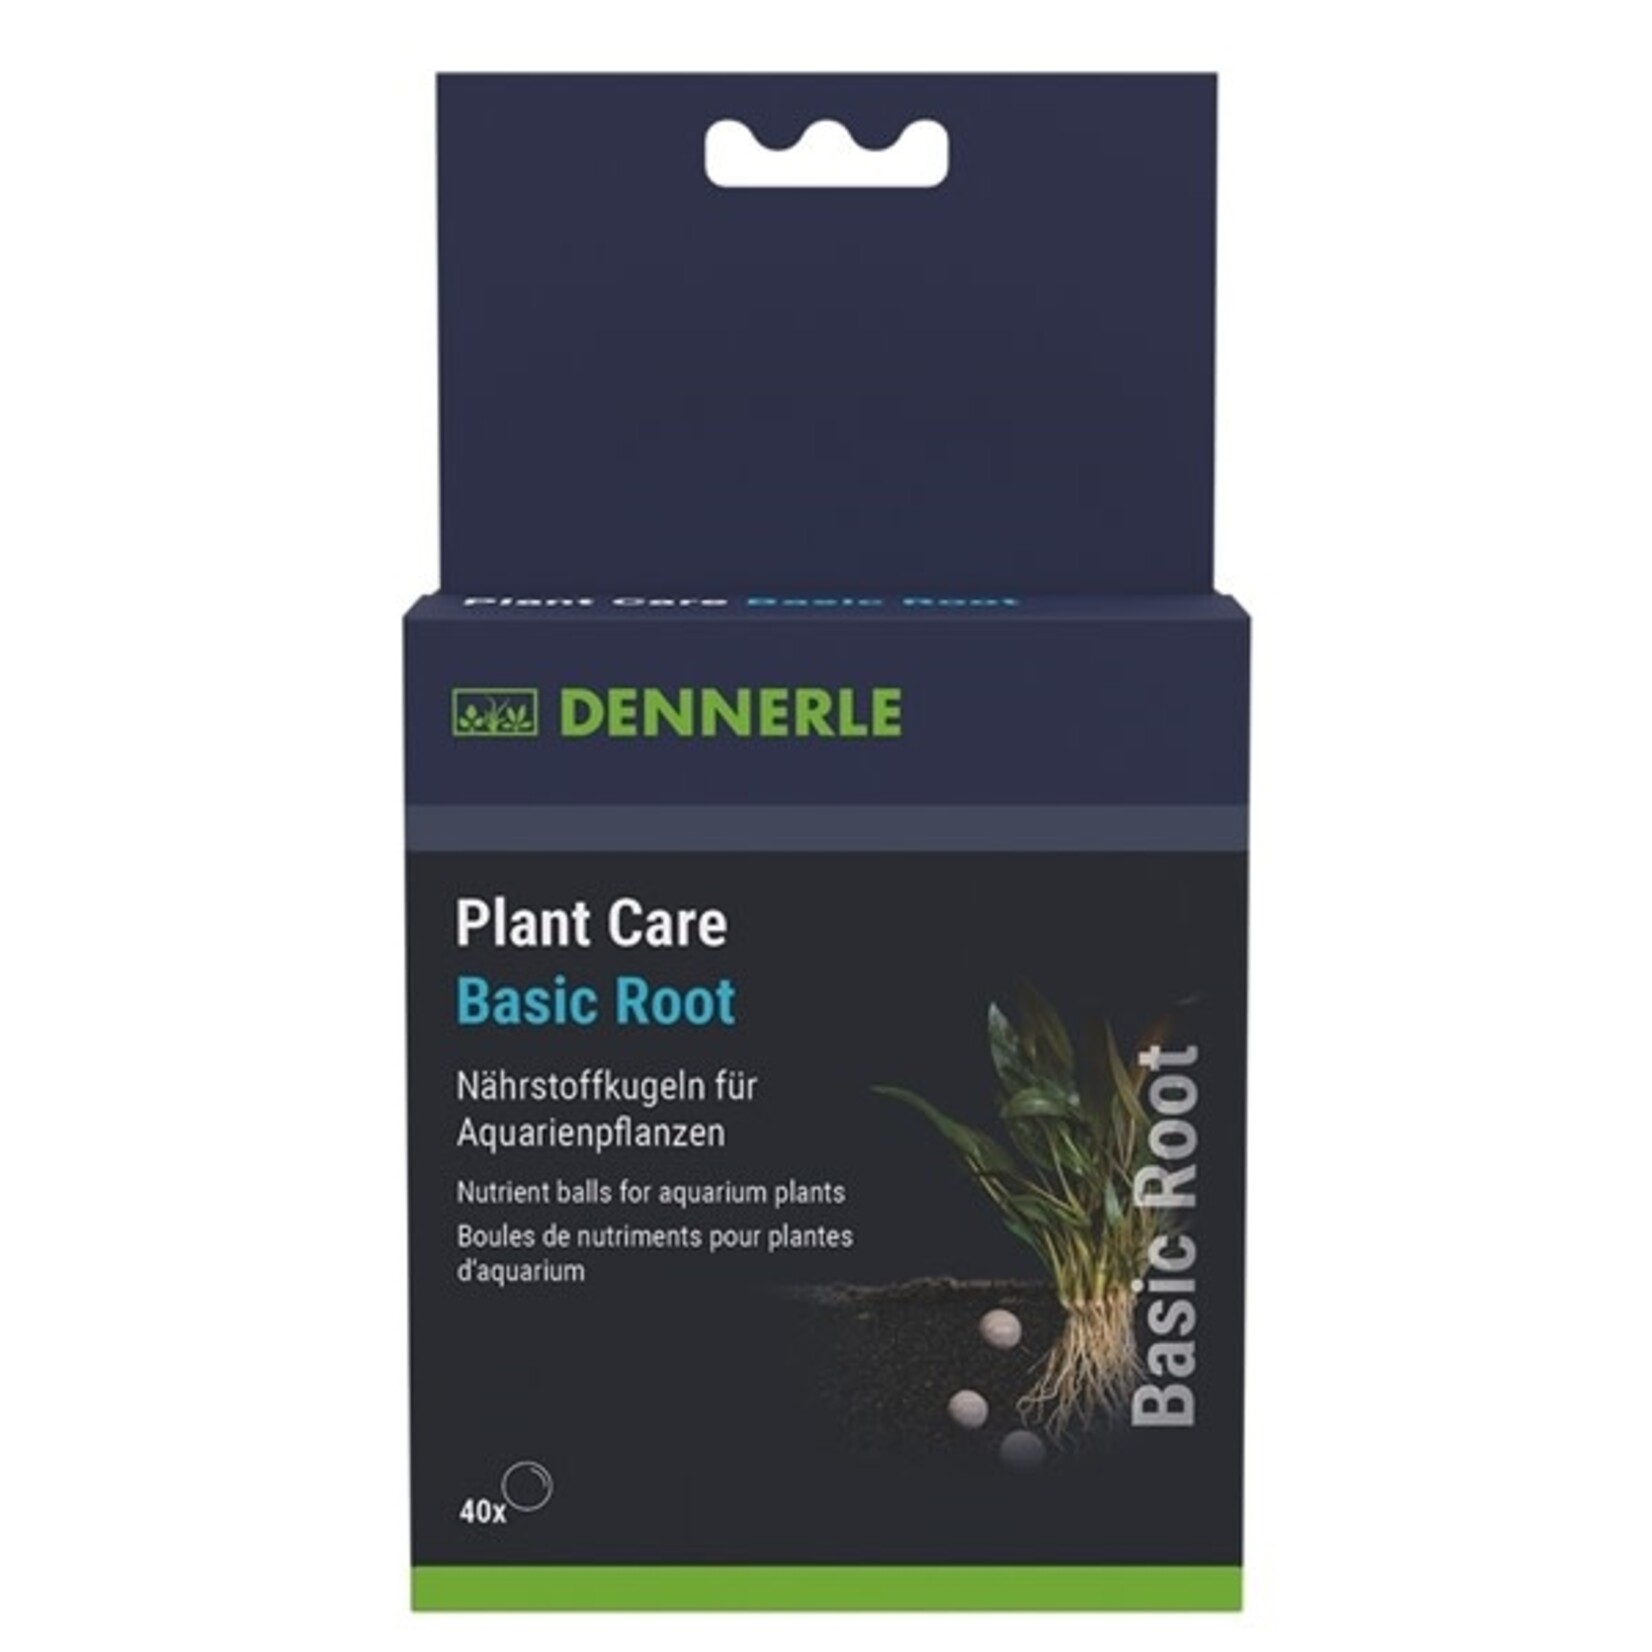 Dennerle DENNERLE PLANT CARE BASIC ROOT 40 ST.